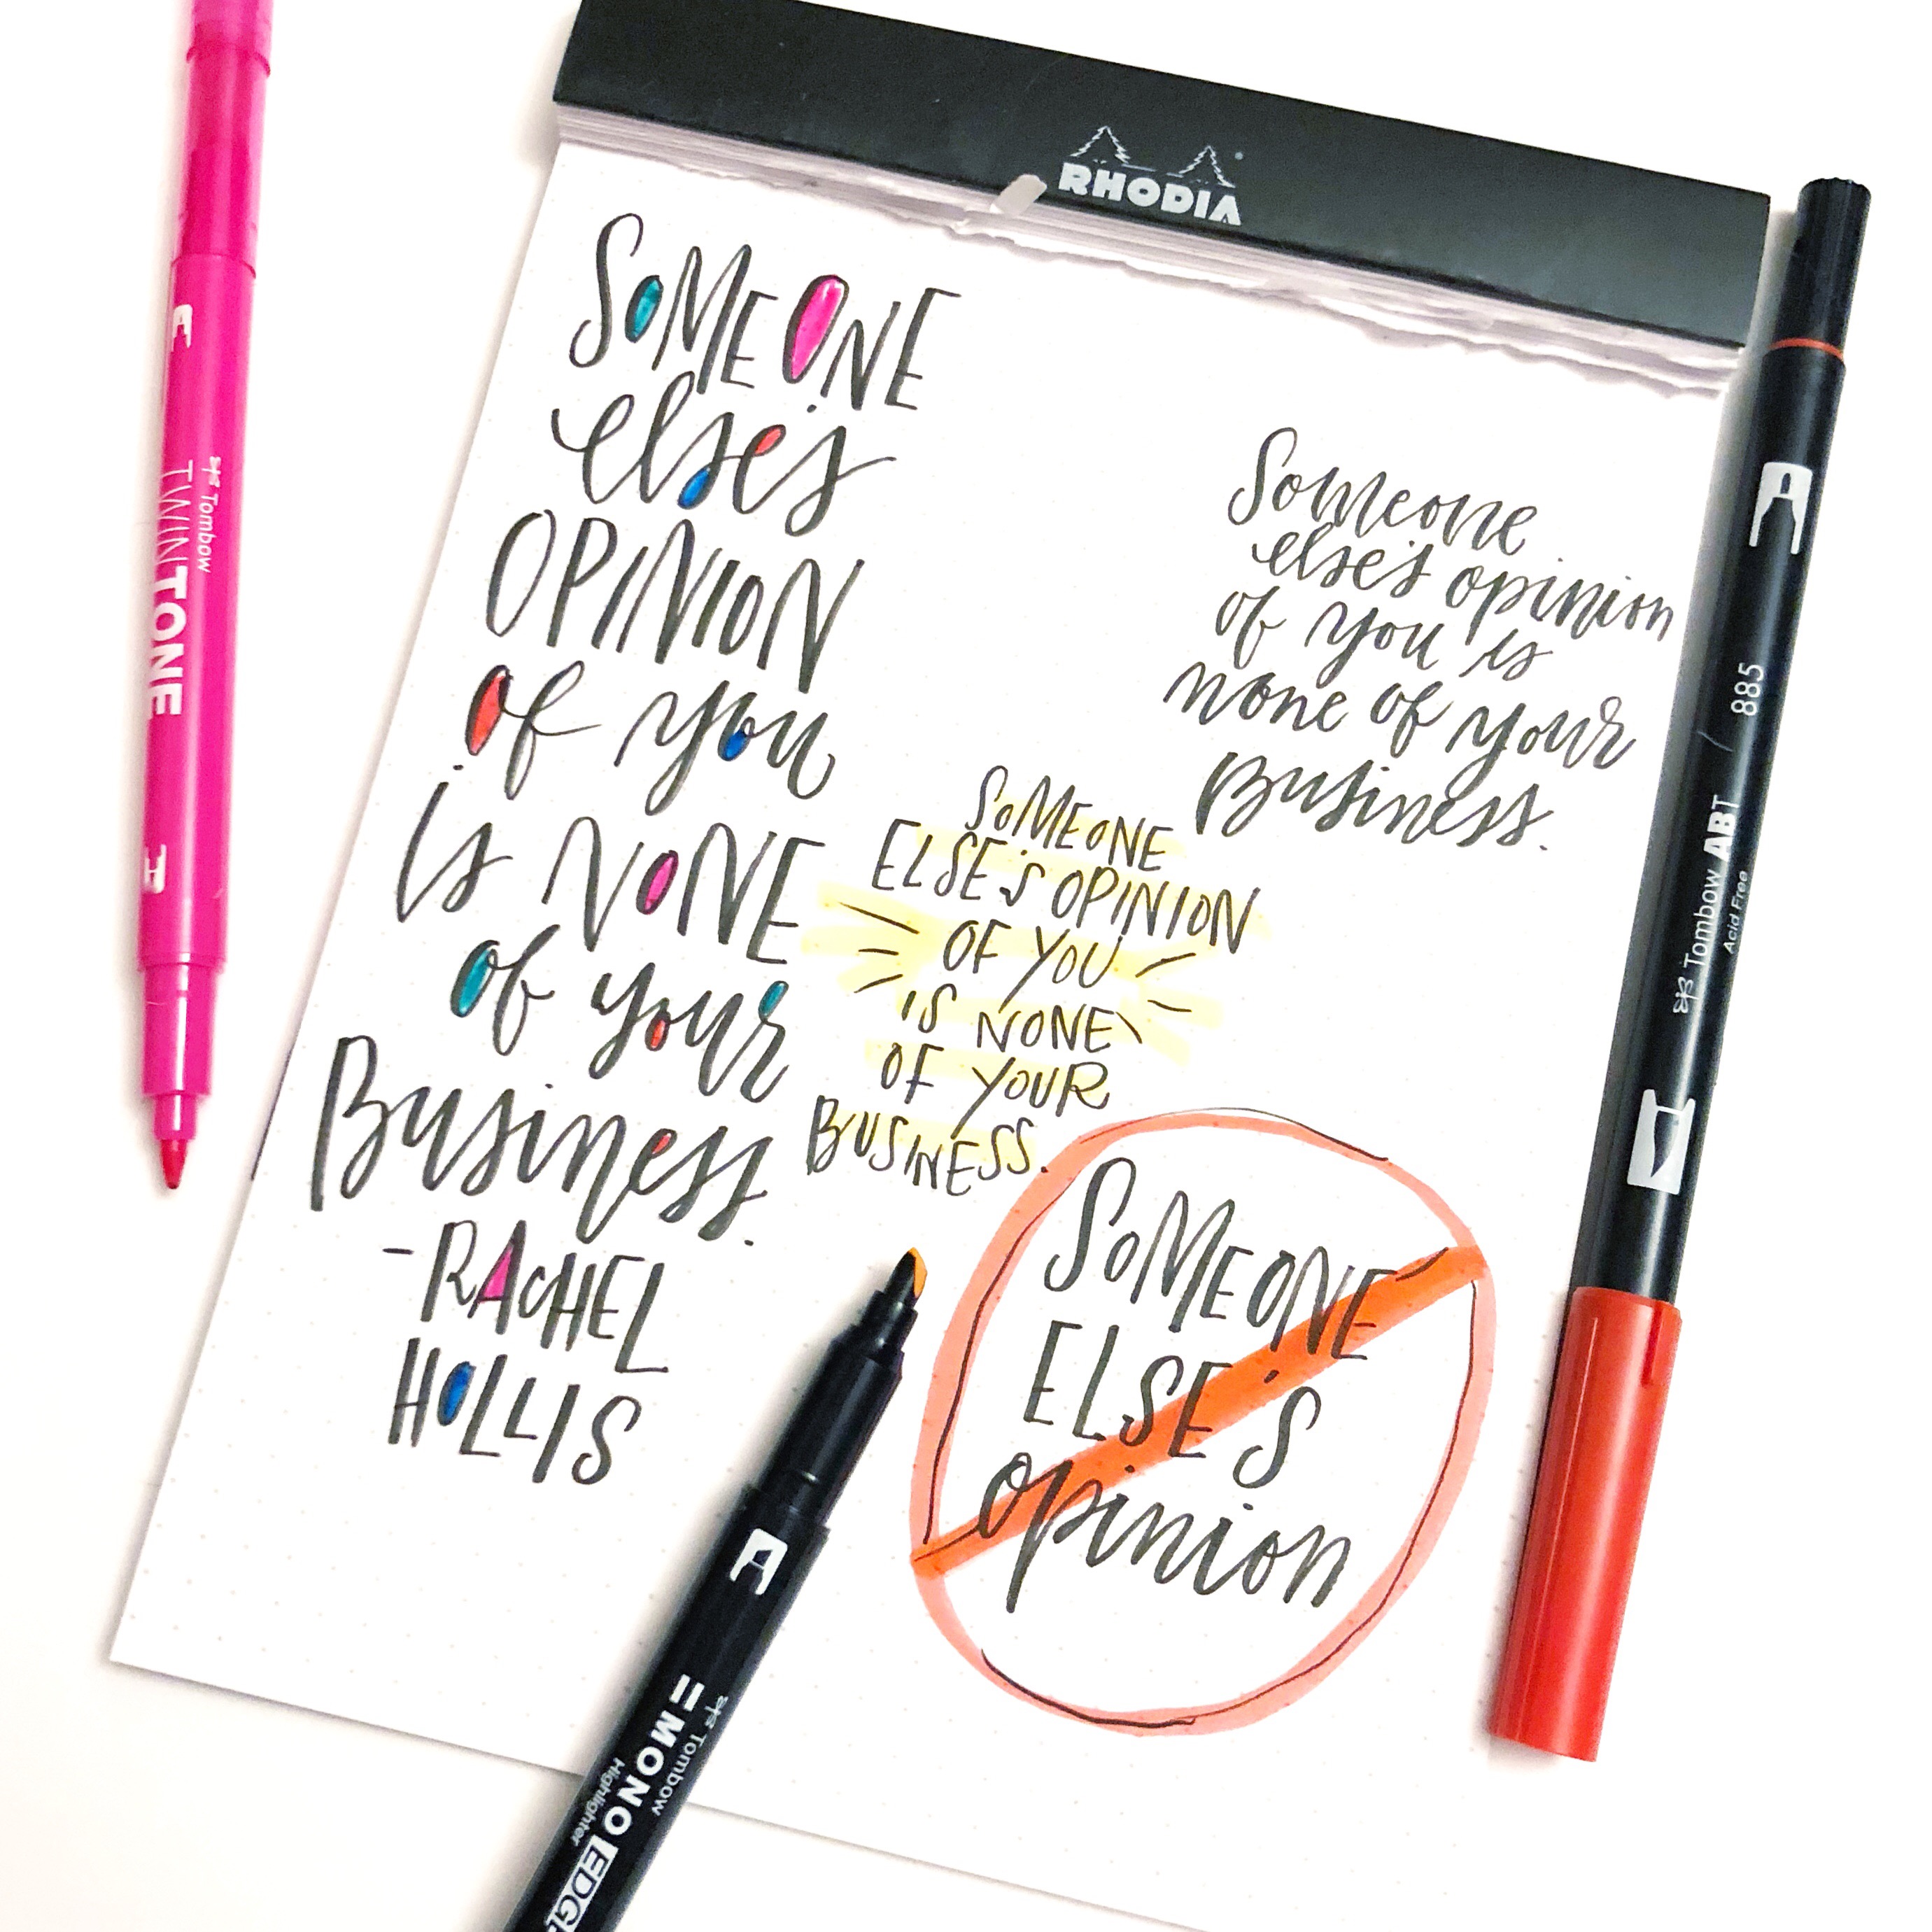 Lauren Fitzmaurice of Renmade Calligraphy shows you 5 fun and easy ways to practice lettering while listening to an inspiring audio book. The best lettering supplies are available at tombowusa.com. For a complete list of Lauren's favorite lettering supplies, checkout renmadecalligraphy.com.